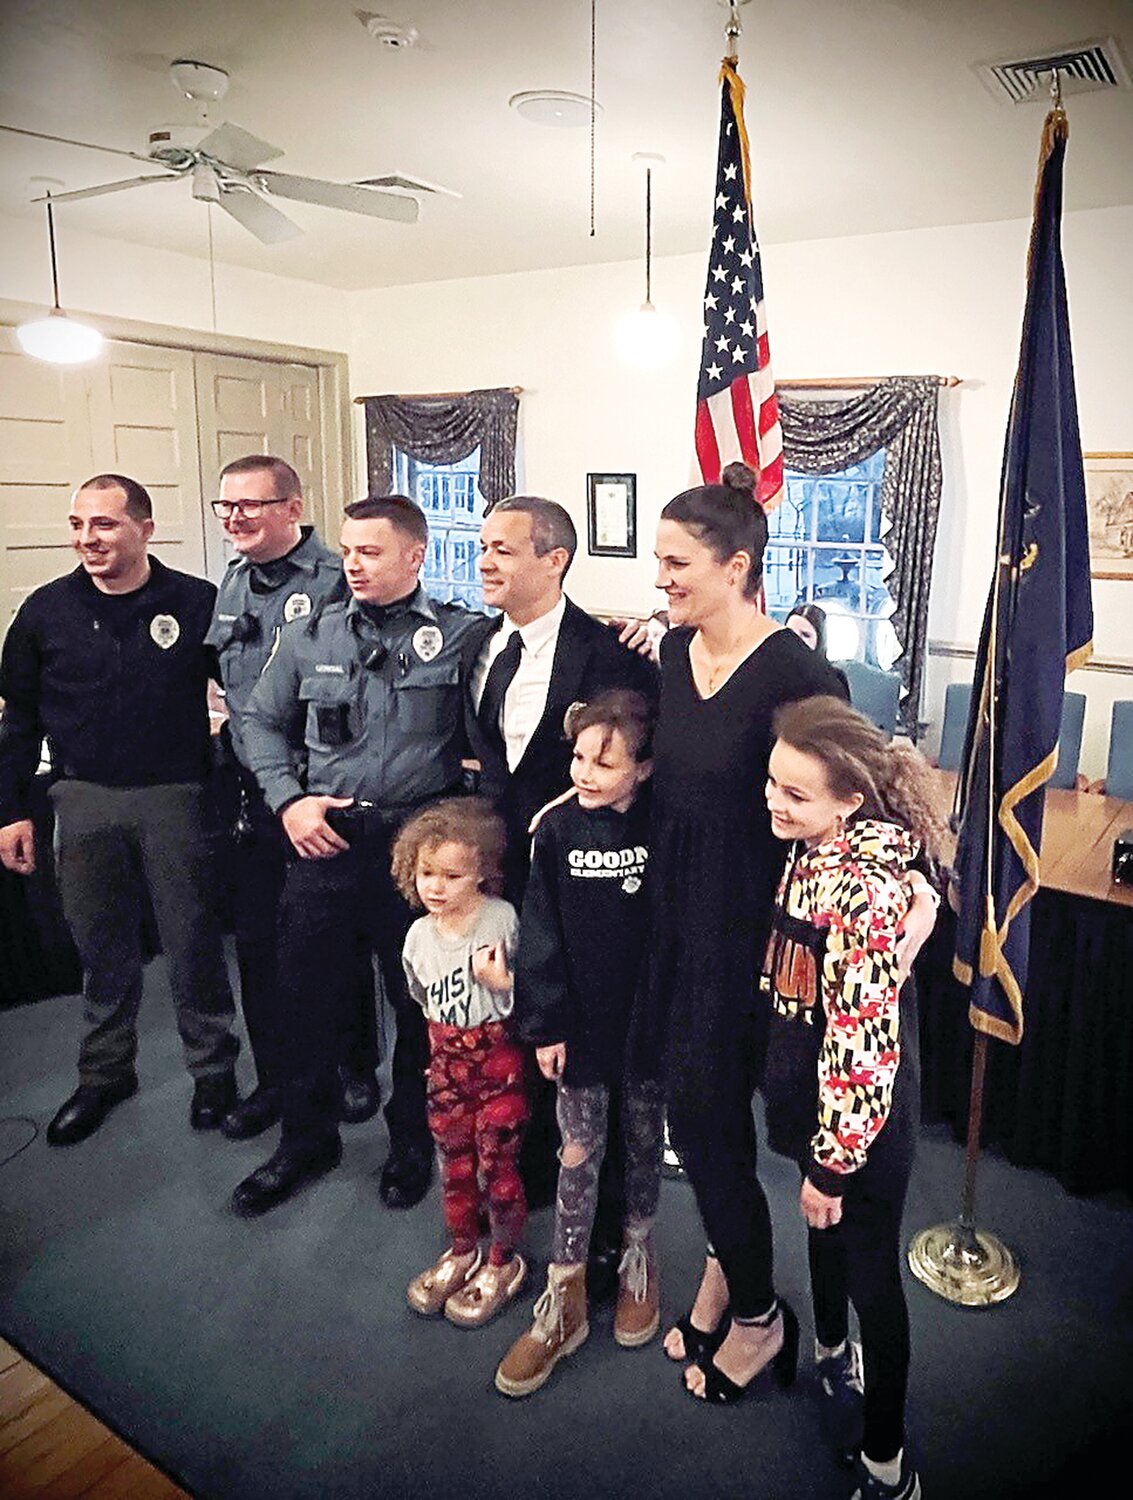 New Yardley Borough part-time Police Officer James Routh (in suit, fourth from left) is joined by his wife, children and some fellow officers at the April 4 borough council meeting.